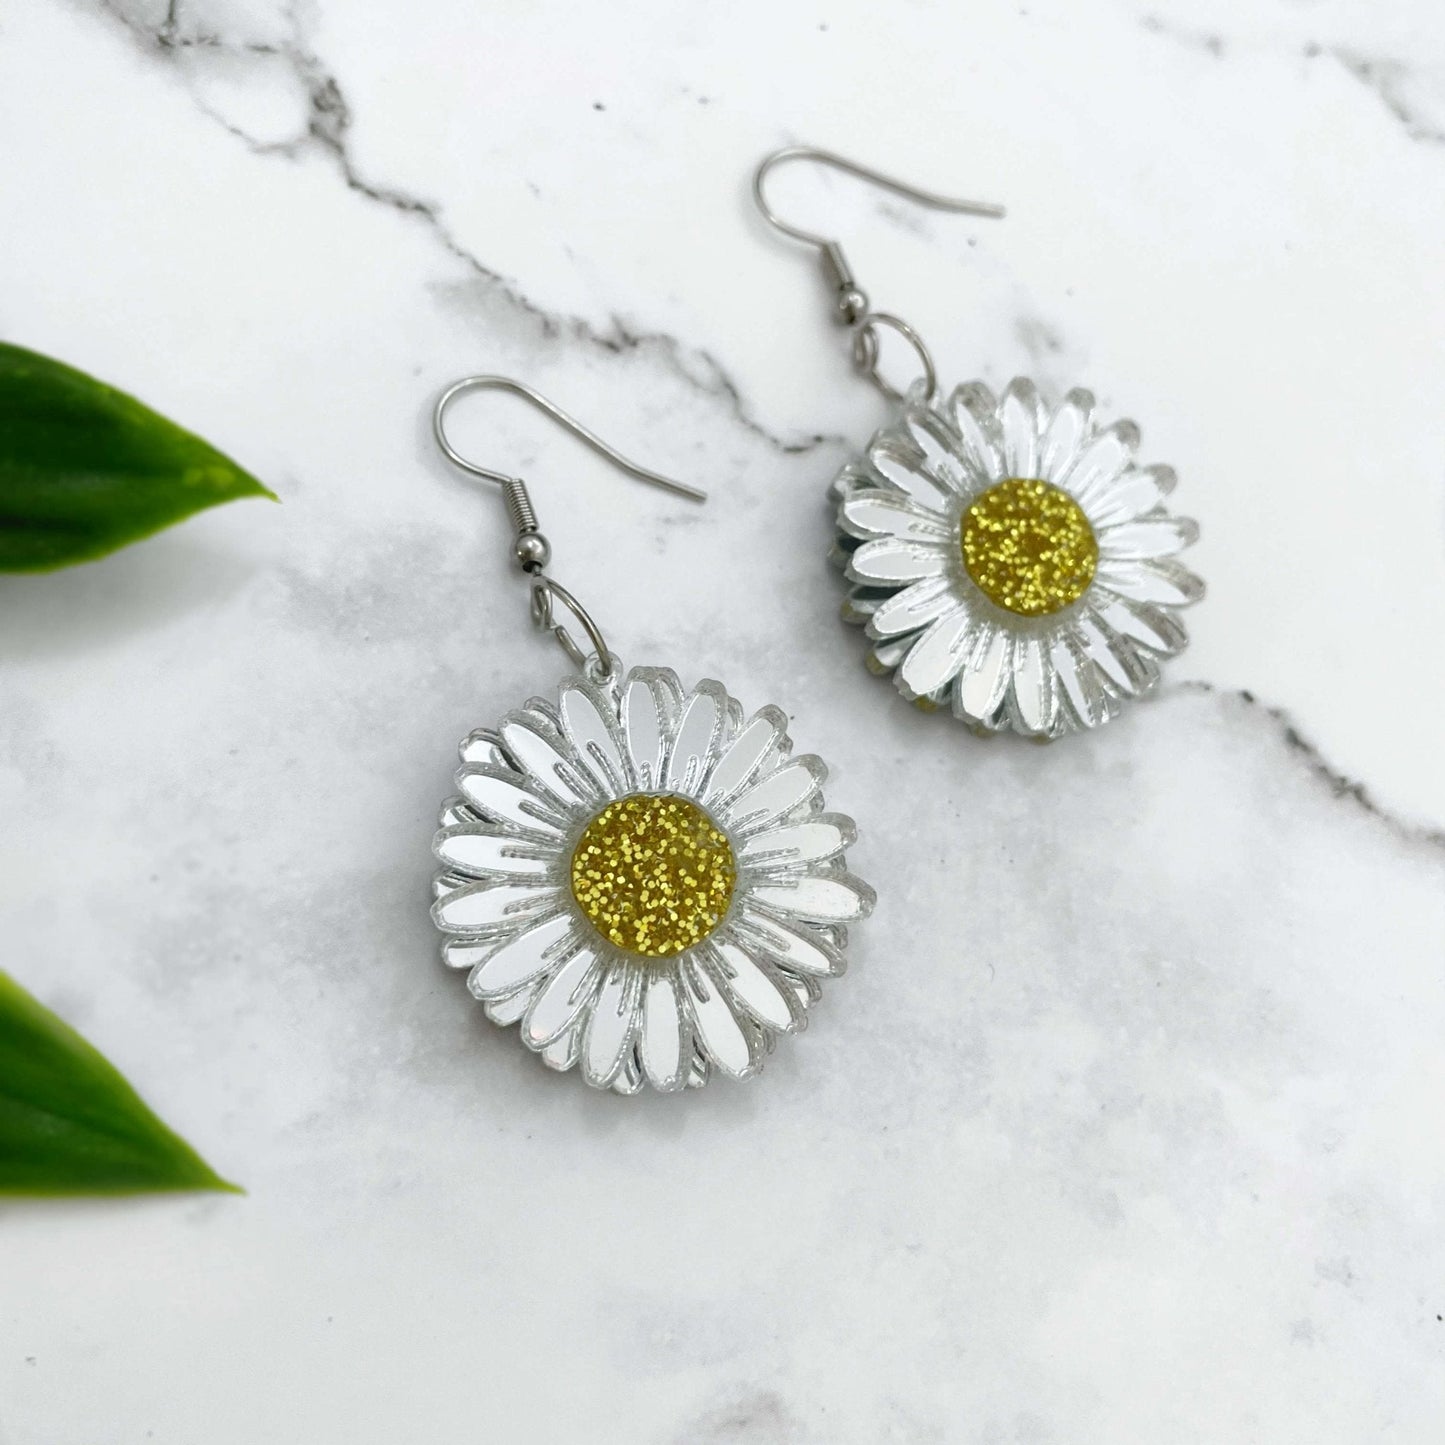 Mirror Daisy Earrings - Lost Minds Clothing